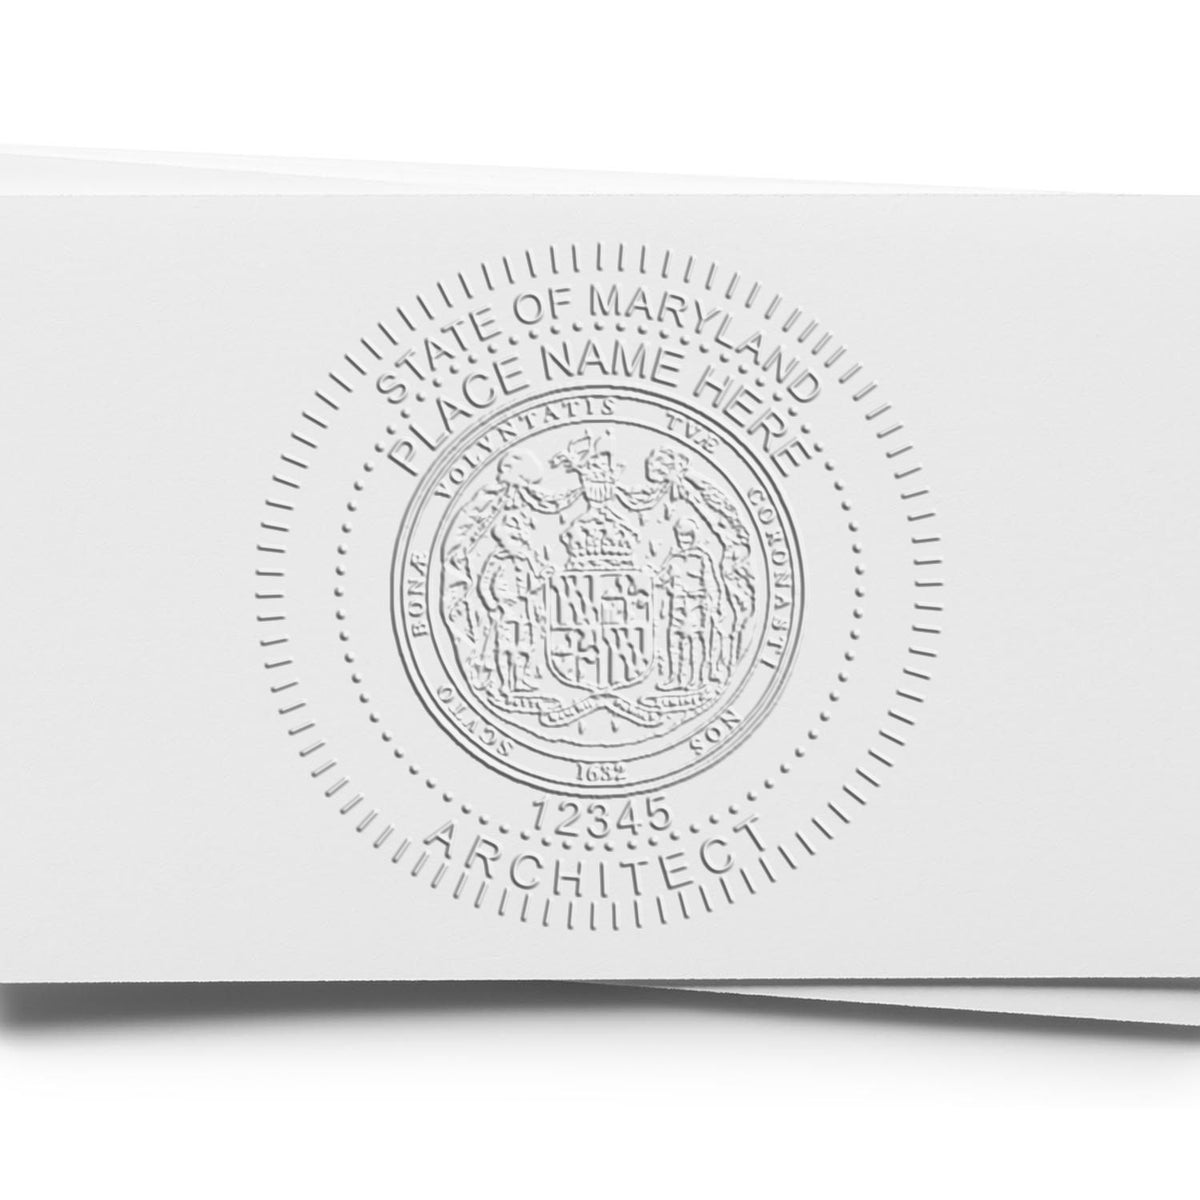 The Gift Maryland Architect Seal stamp impression comes to life with a crisp, detailed image stamped on paper - showcasing true professional quality.